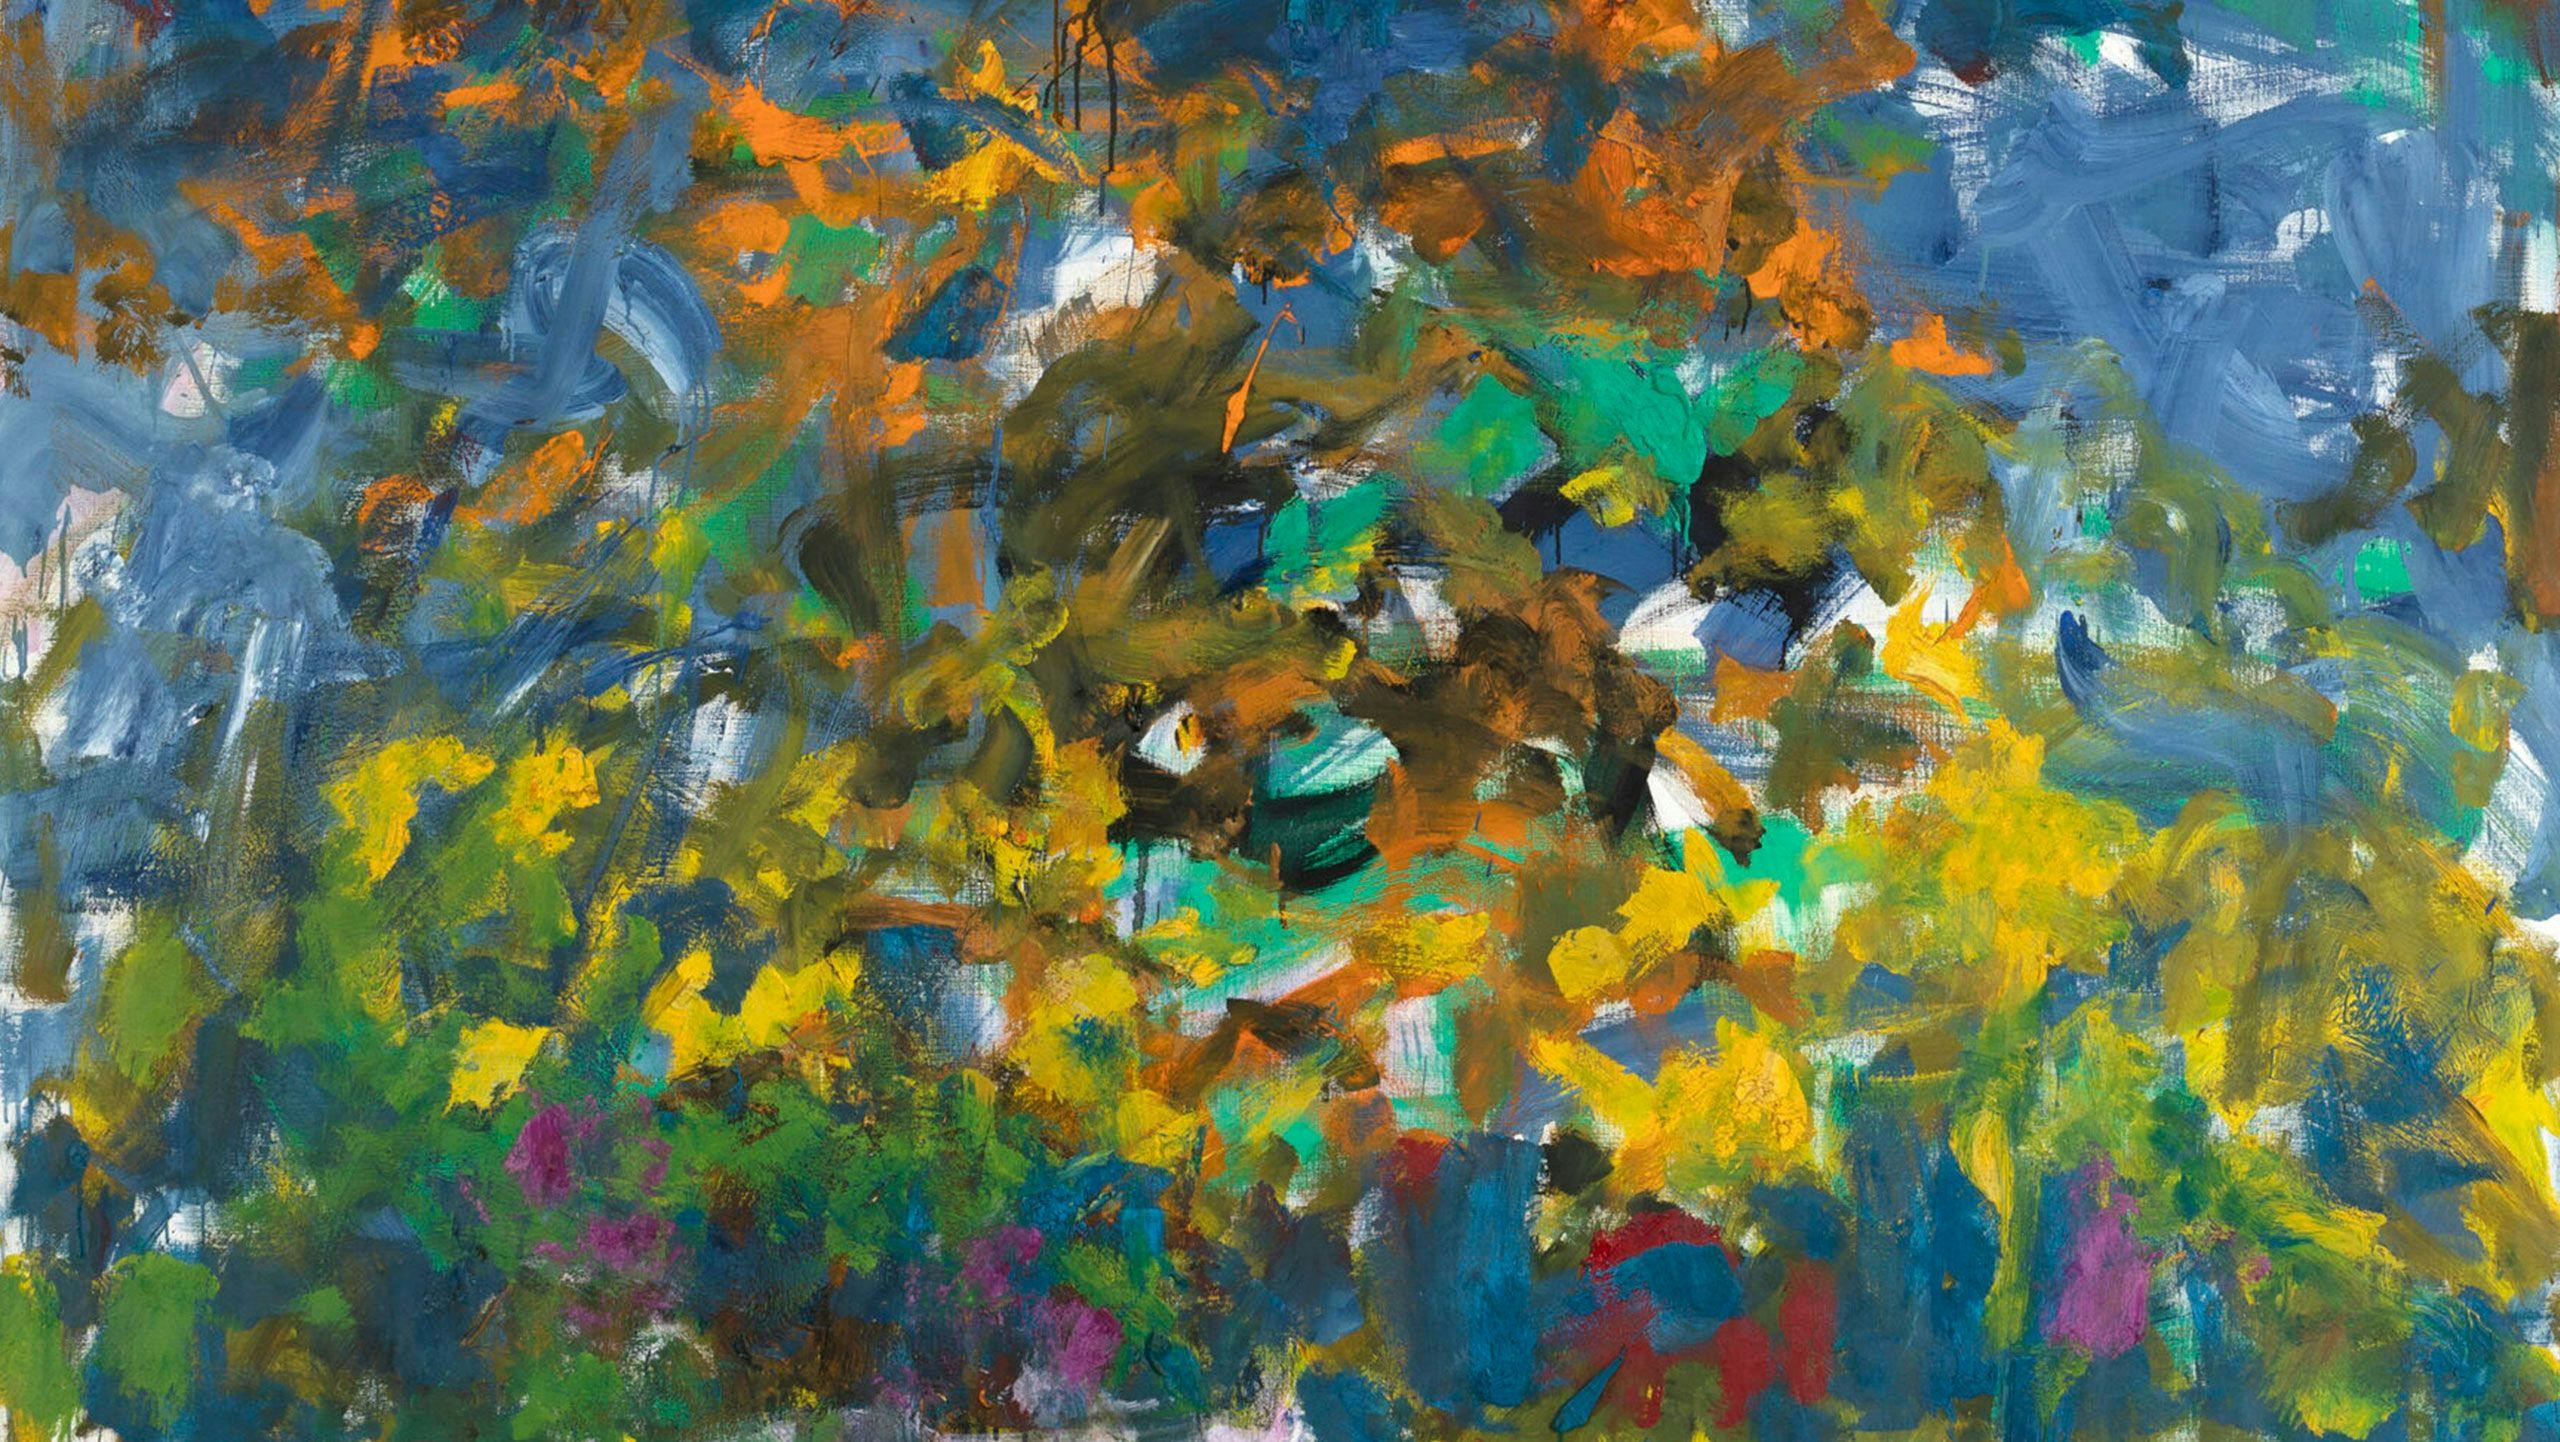 A detail of a painting by Joan Mitchell, titled La Grande Vallée, dated 1983.